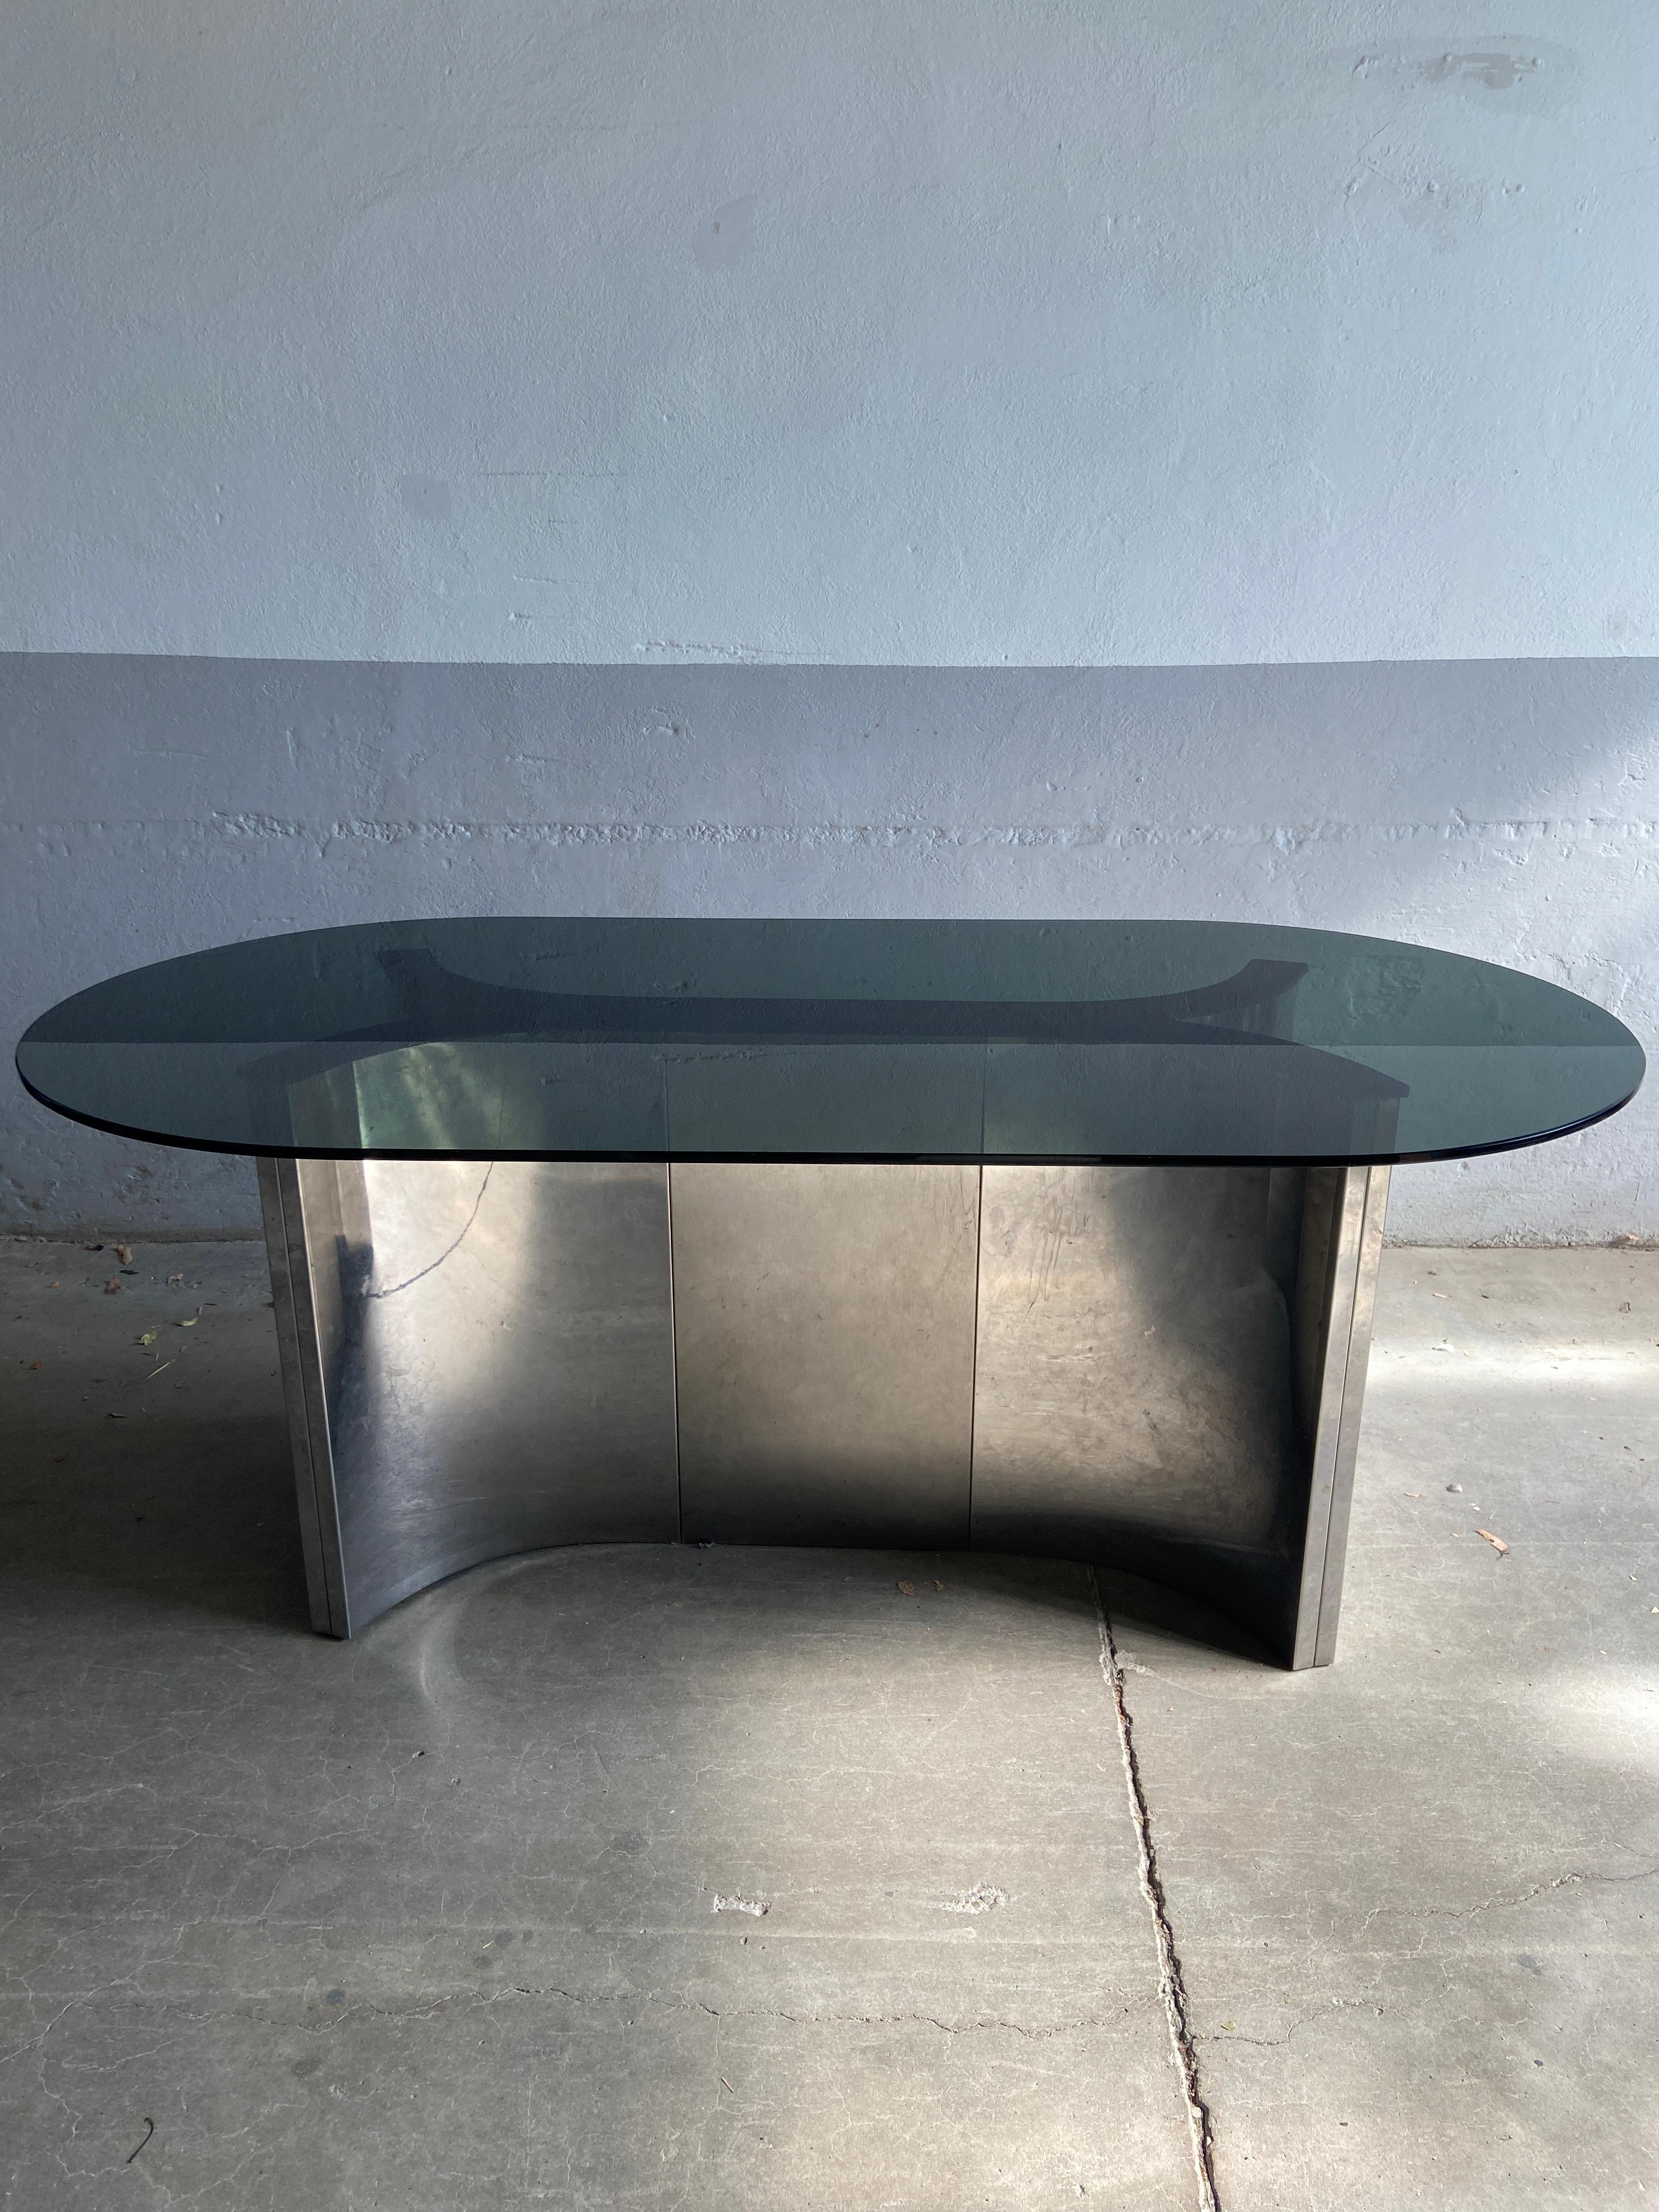 Mid-Century Modern Italian dining or conference stainless steel table with oval smoked glass top from 1970s.
The glass top presents a couple of signs due to age and use, but the table results in very good vintage conditions.